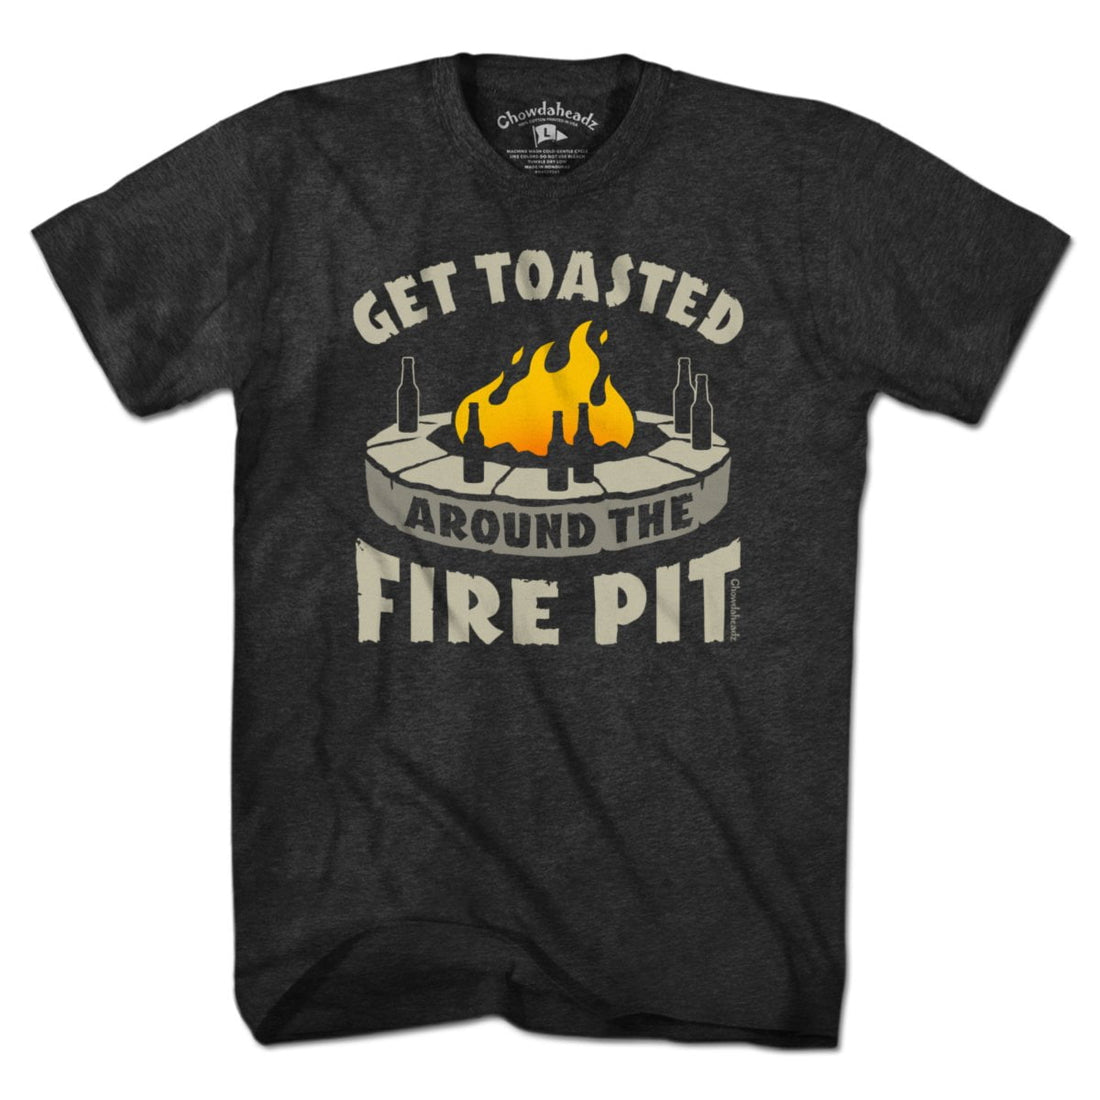 Get Toasted Around The Fire Pit T-Shirt - Chowdaheadz